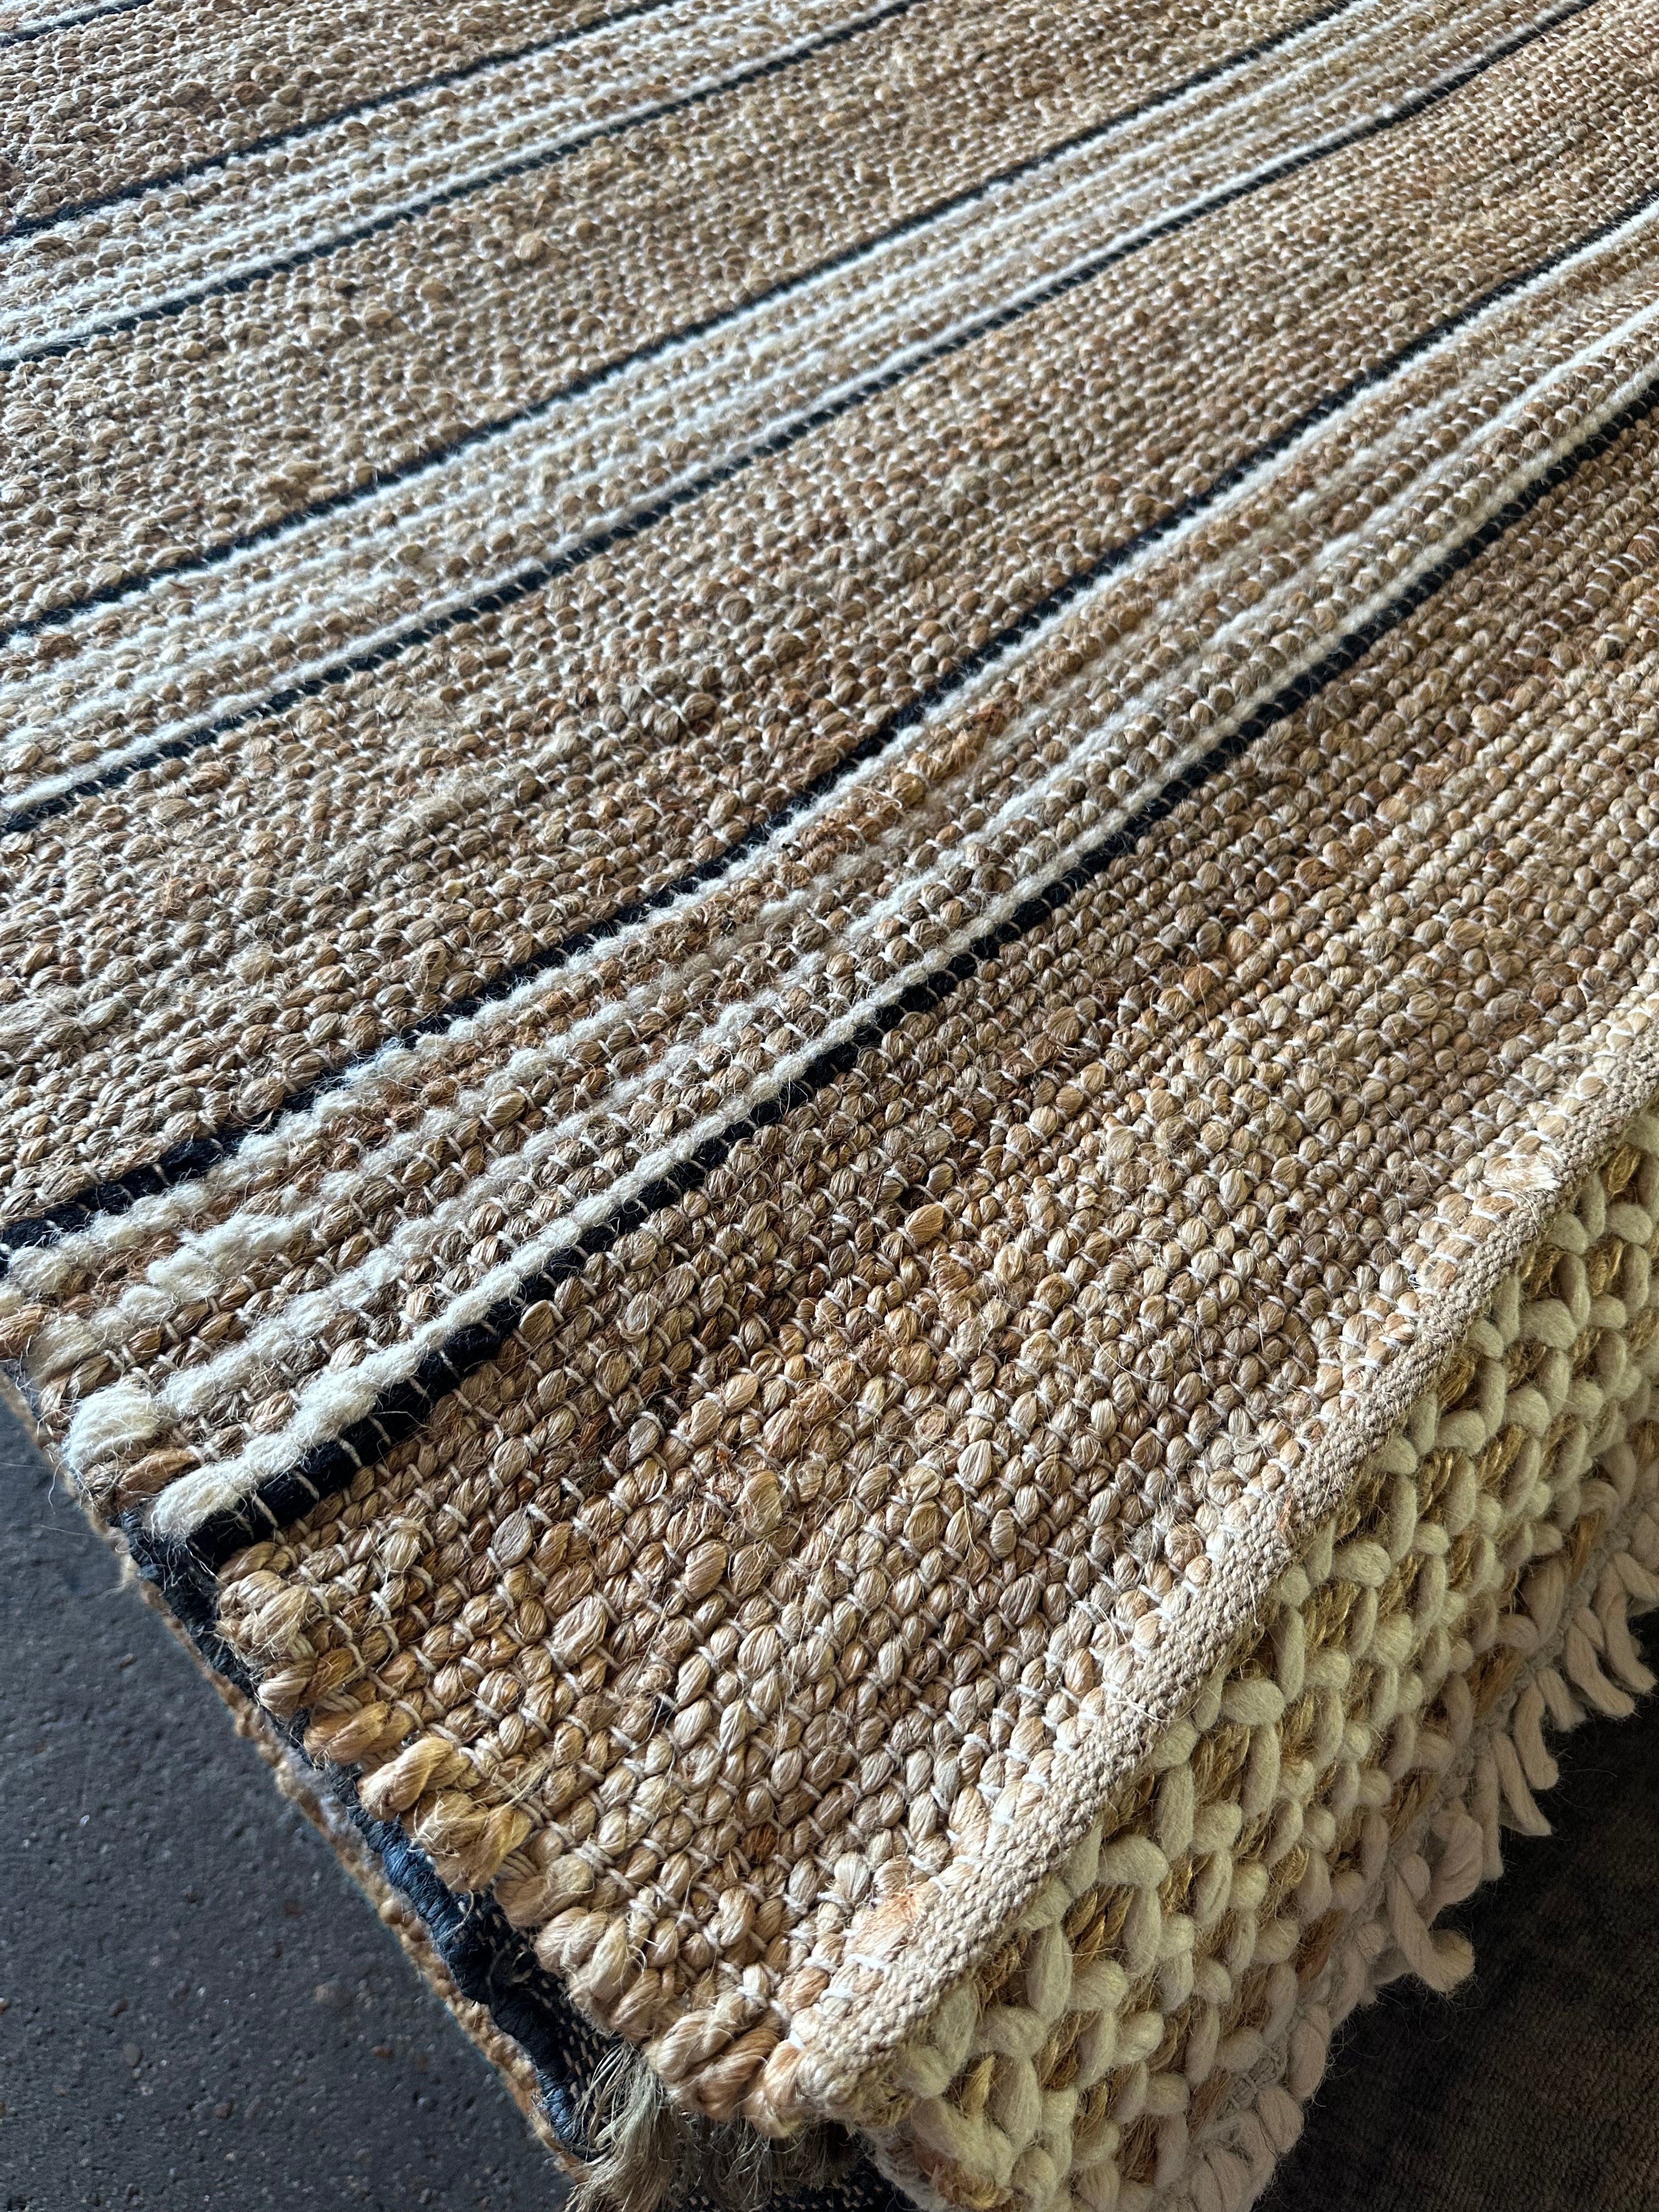 Count Basie Handwoven Striped Natural Jute Rug (Multiple Sizes)